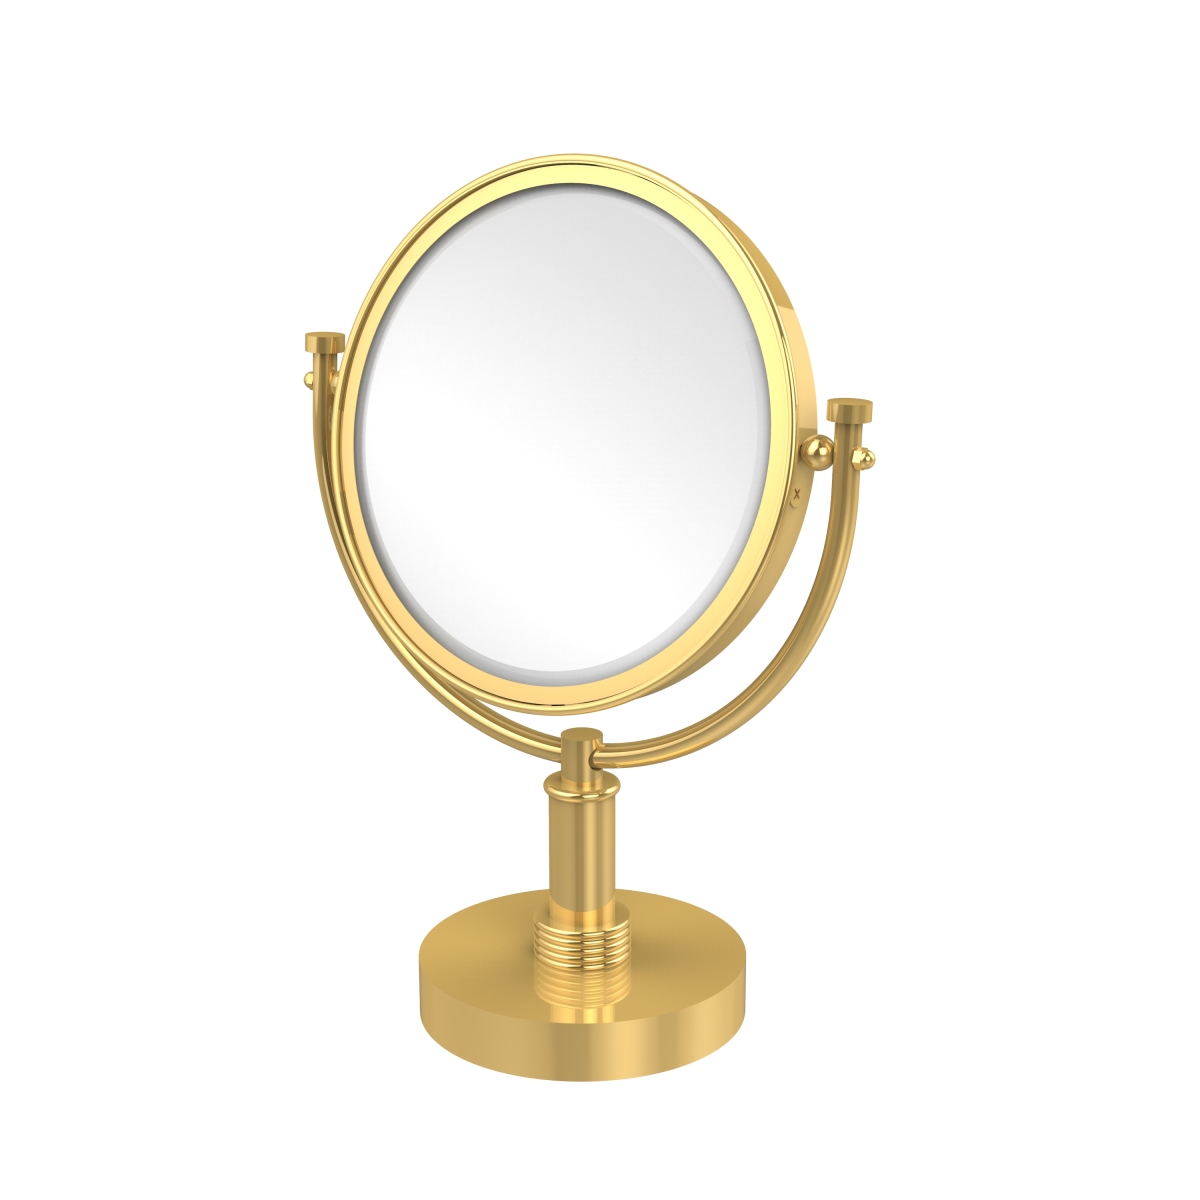 Dm-4g-2x-unl Grooved Ring Style 8 In. Vanity Top Make-up Mirror 2x Magnification, Unlacquered Brass